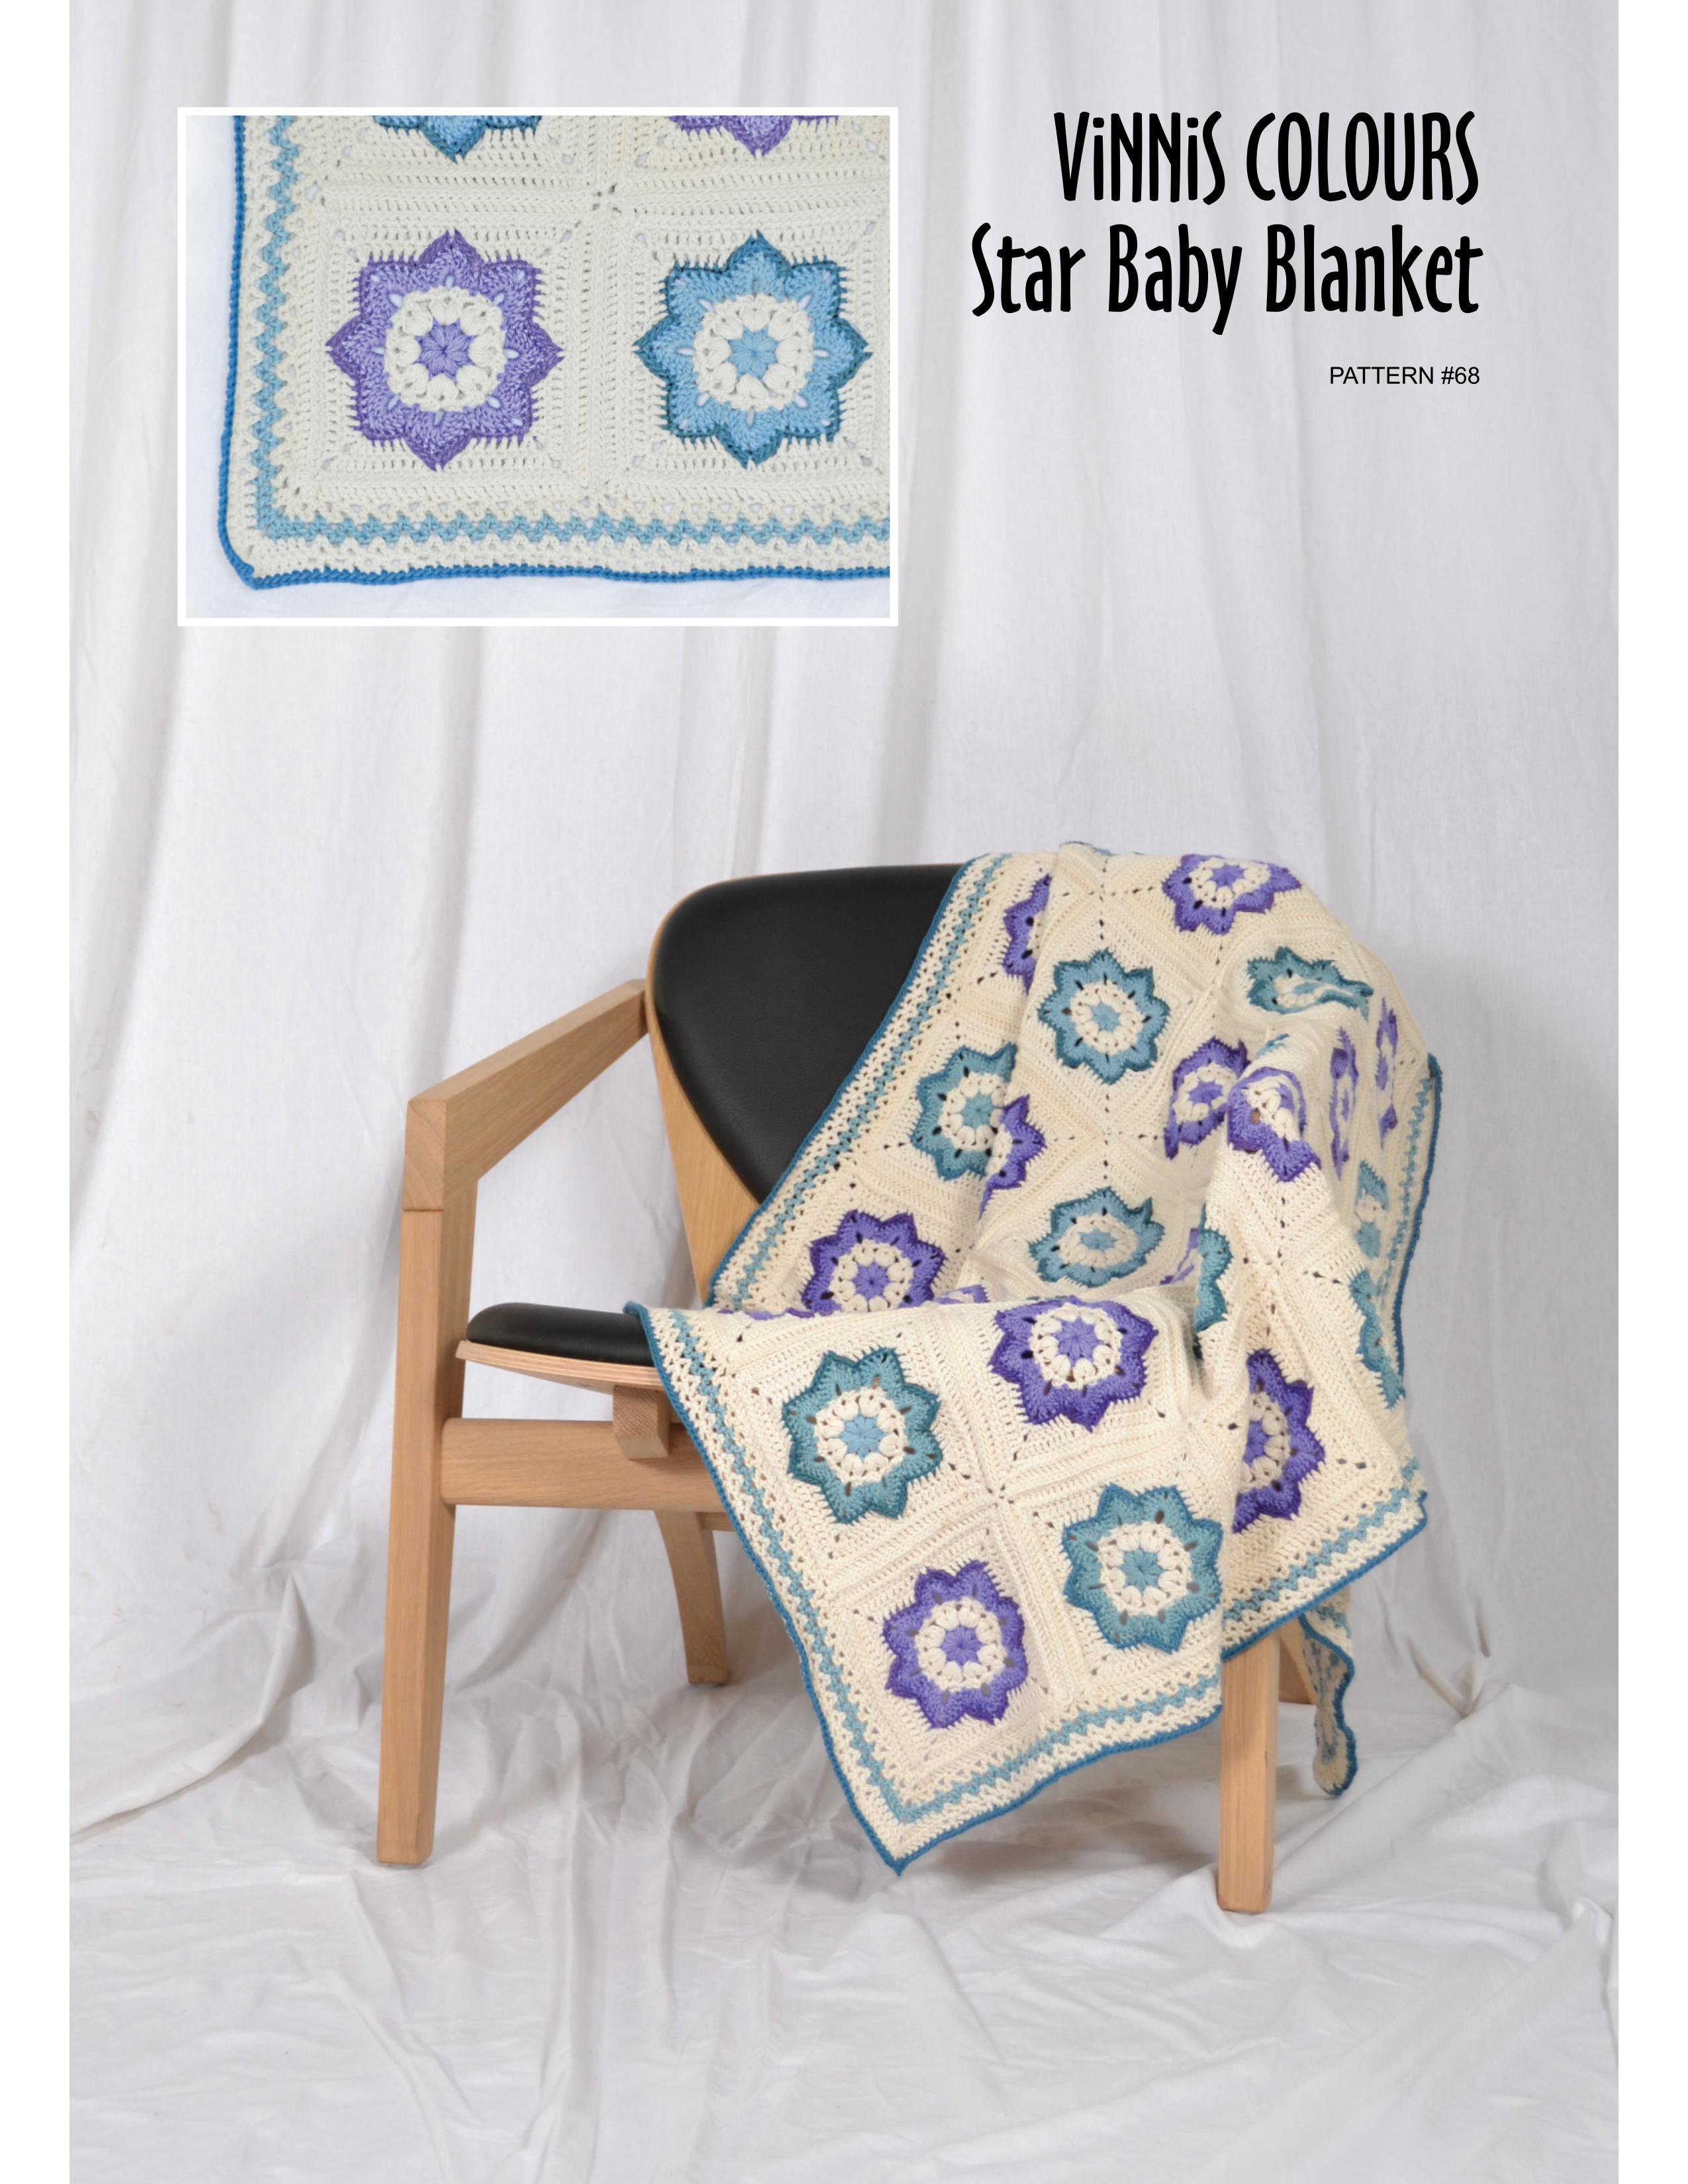 VCDL - P068 - Star Baby Blanket